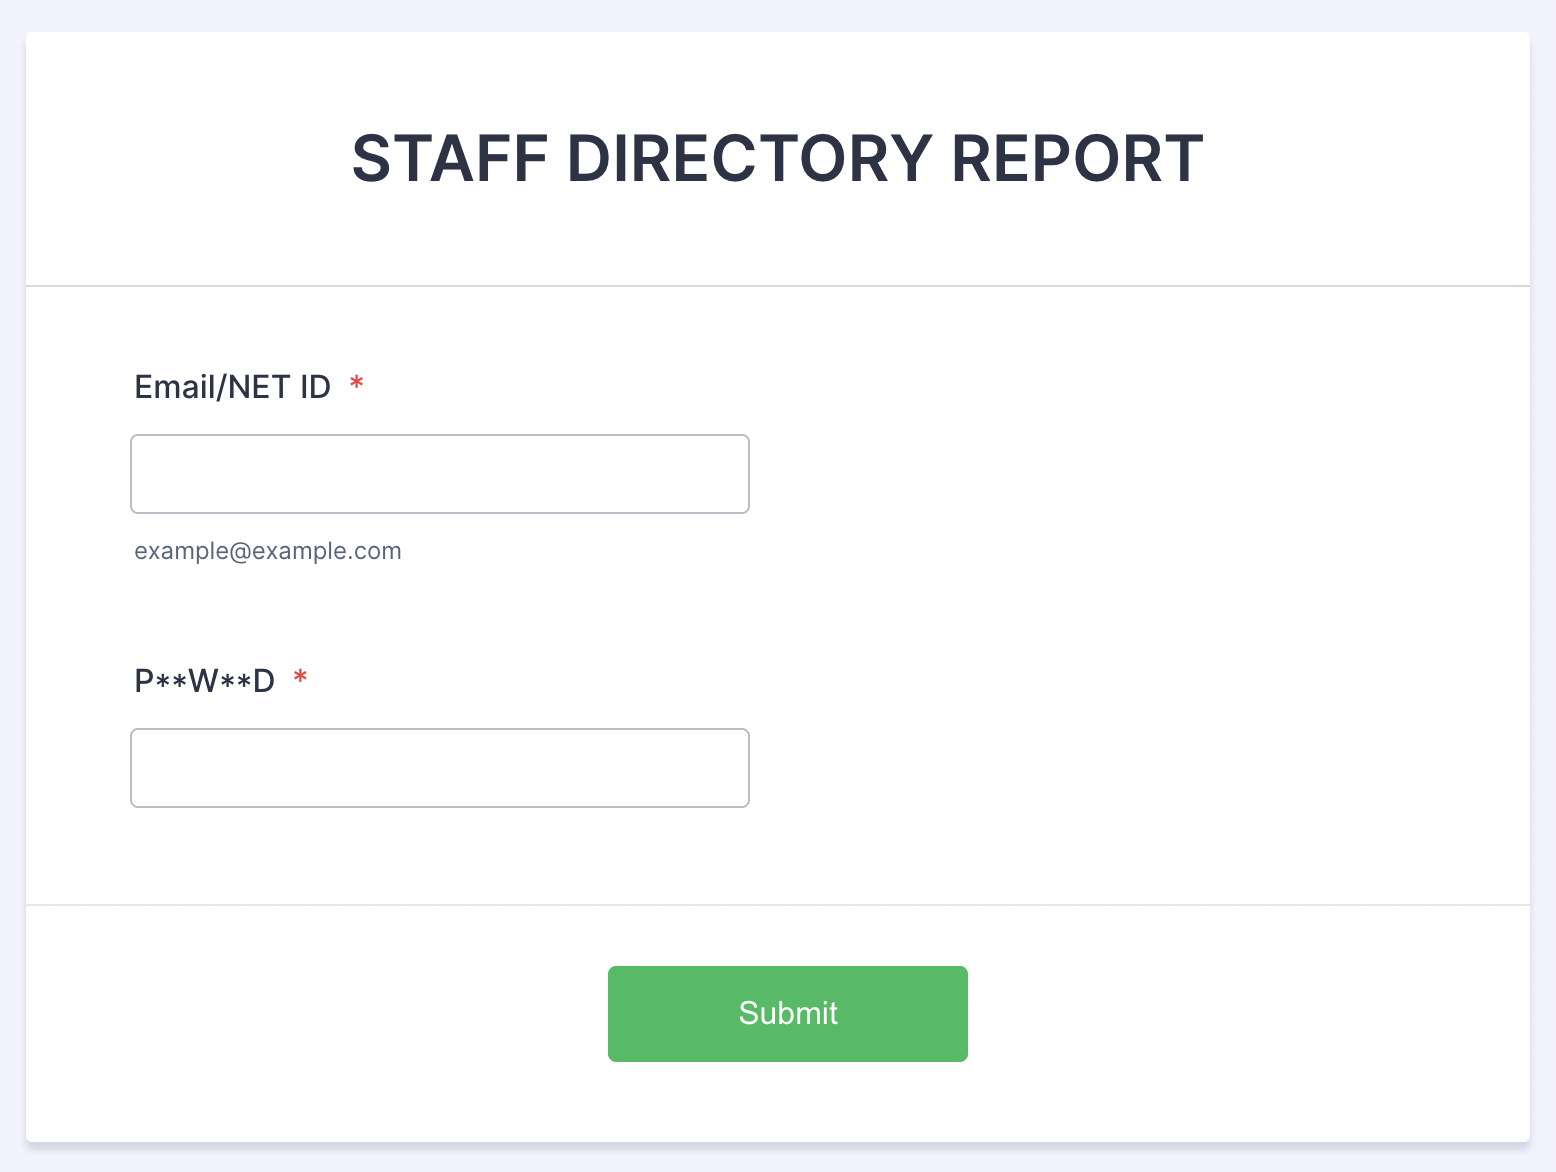 Fake Staff Directory Report form asking for the user to submit their email and password.